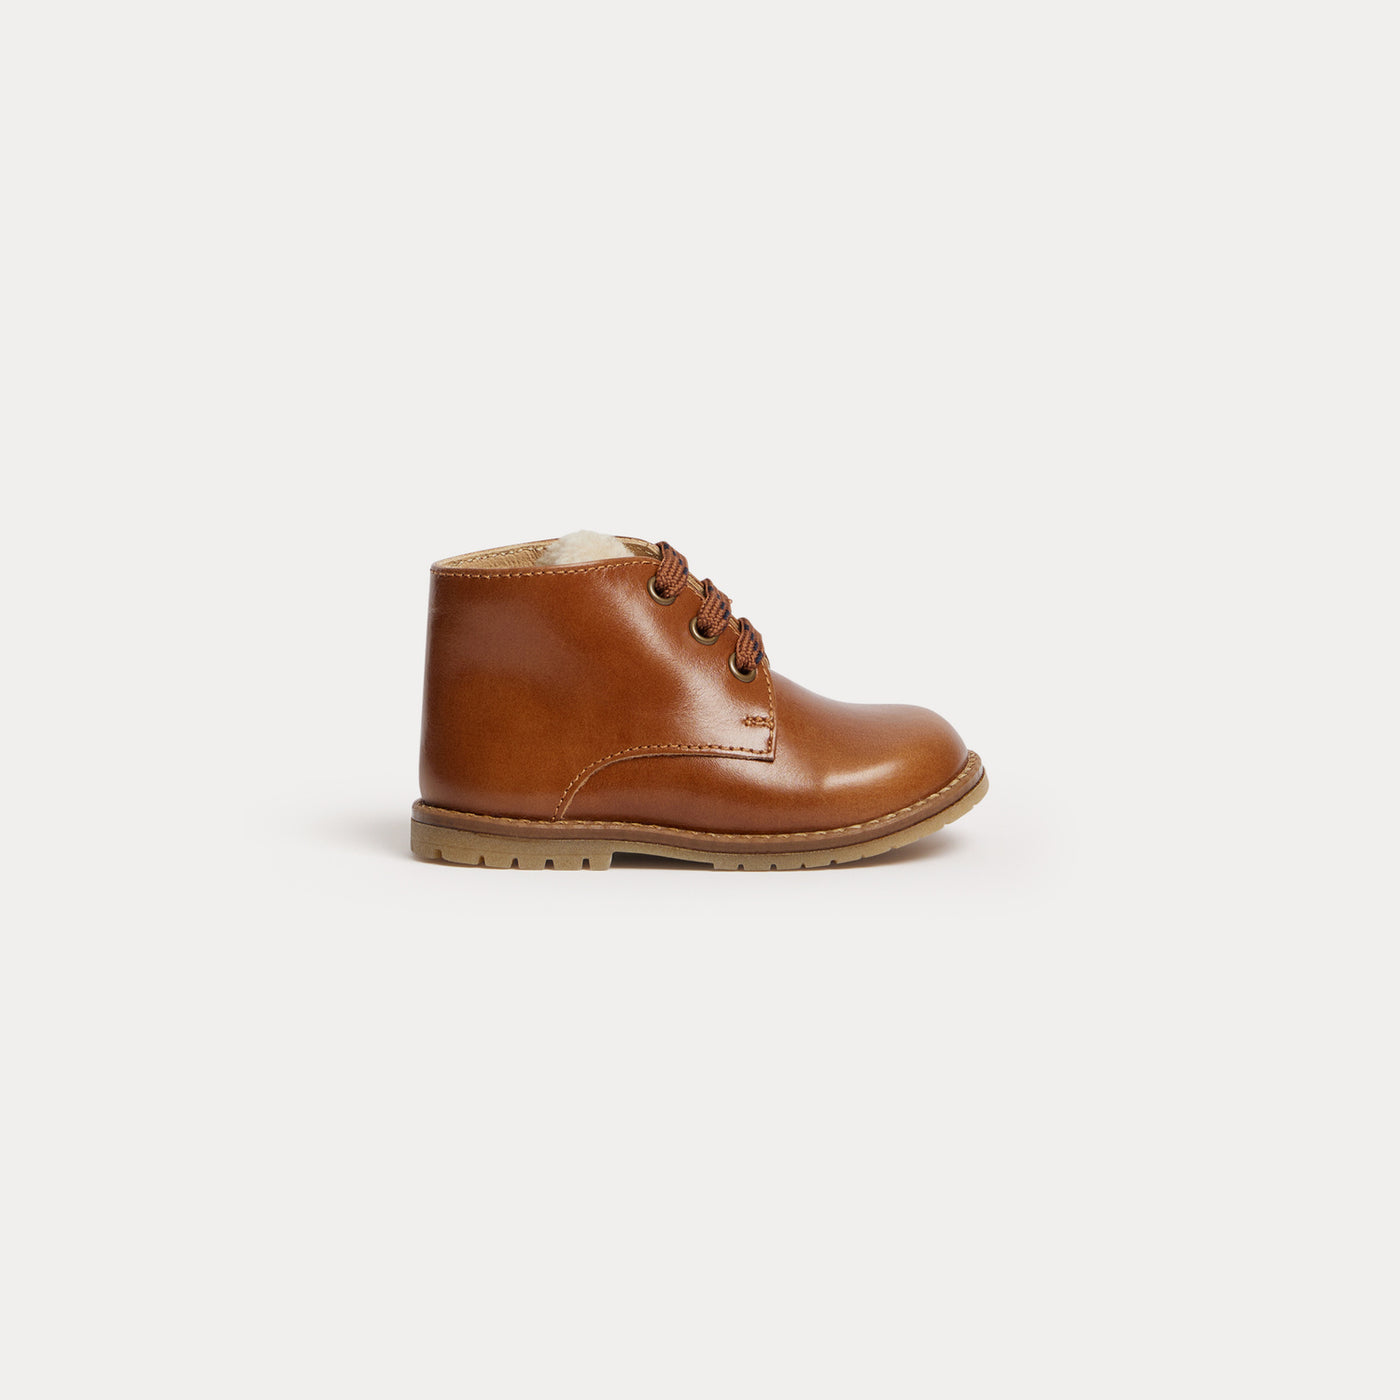 Litwood First Steps Derby Shoes cocoa